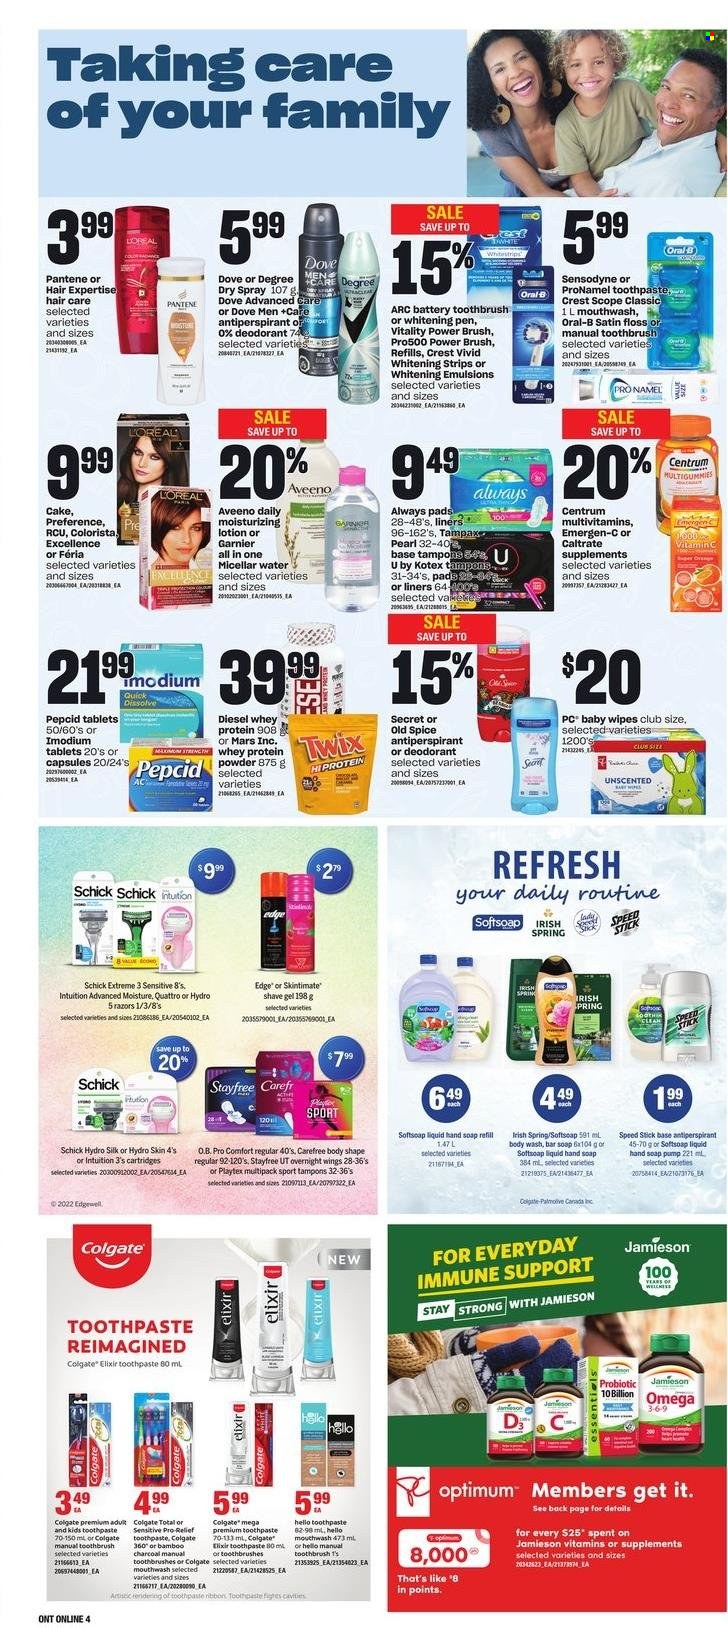 thumbnail - Zehrs Flyer - January 26, 2023 - February 01, 2023 - Sales products - cake, Silk, strips, Dove, Twix, Mars, spice, wipes, baby wipes, Aveeno, body wash, Softsoap, hand soap, Palmolive, soap bar, soap, toothbrush, toothpaste, mouthwash, Crest, Stayfree, Playtex, Always pads, Carefree, Kotex, tampons, L’Oréal, micellar water, Pantene, body lotion, anti-perspirant, Speed Stick, shave gel, Schick, pen, Optimum, multivitamin, vitamin c, Pepcid, Omega-3, Emergen-C, whey protein, Centrum, plaster, Colgate, Garnier, Tampax, Imodium, Old Spice, Oral-B, Sensodyne, deodorant. Page 12.